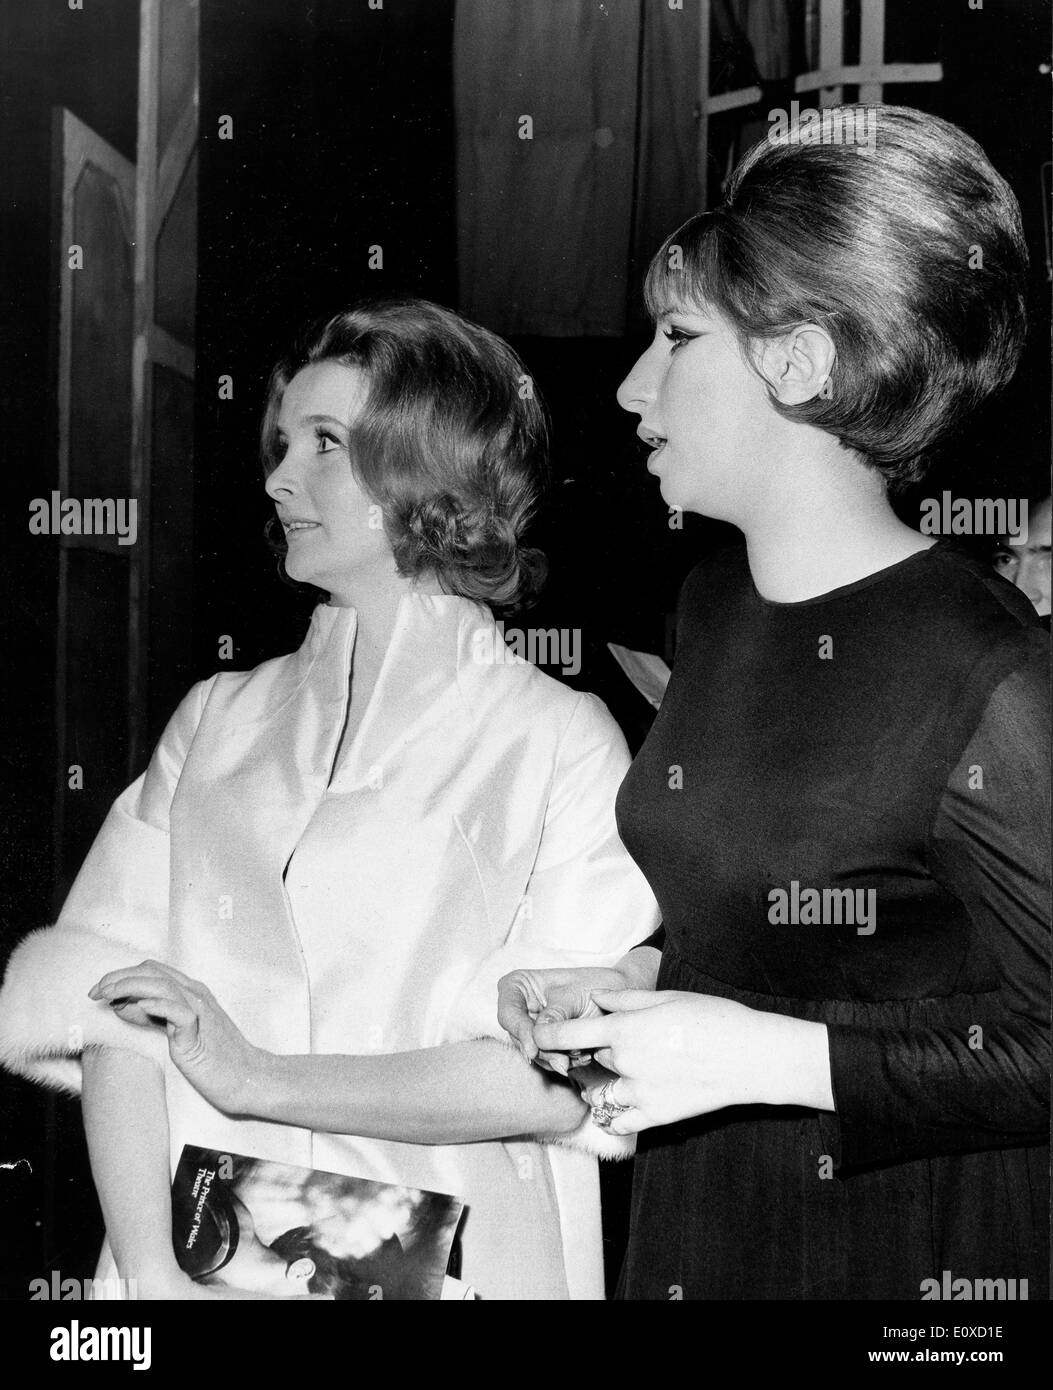 Barbra Streisand at the premiere of a play at the Prince of Wales Theatre Stock Photo